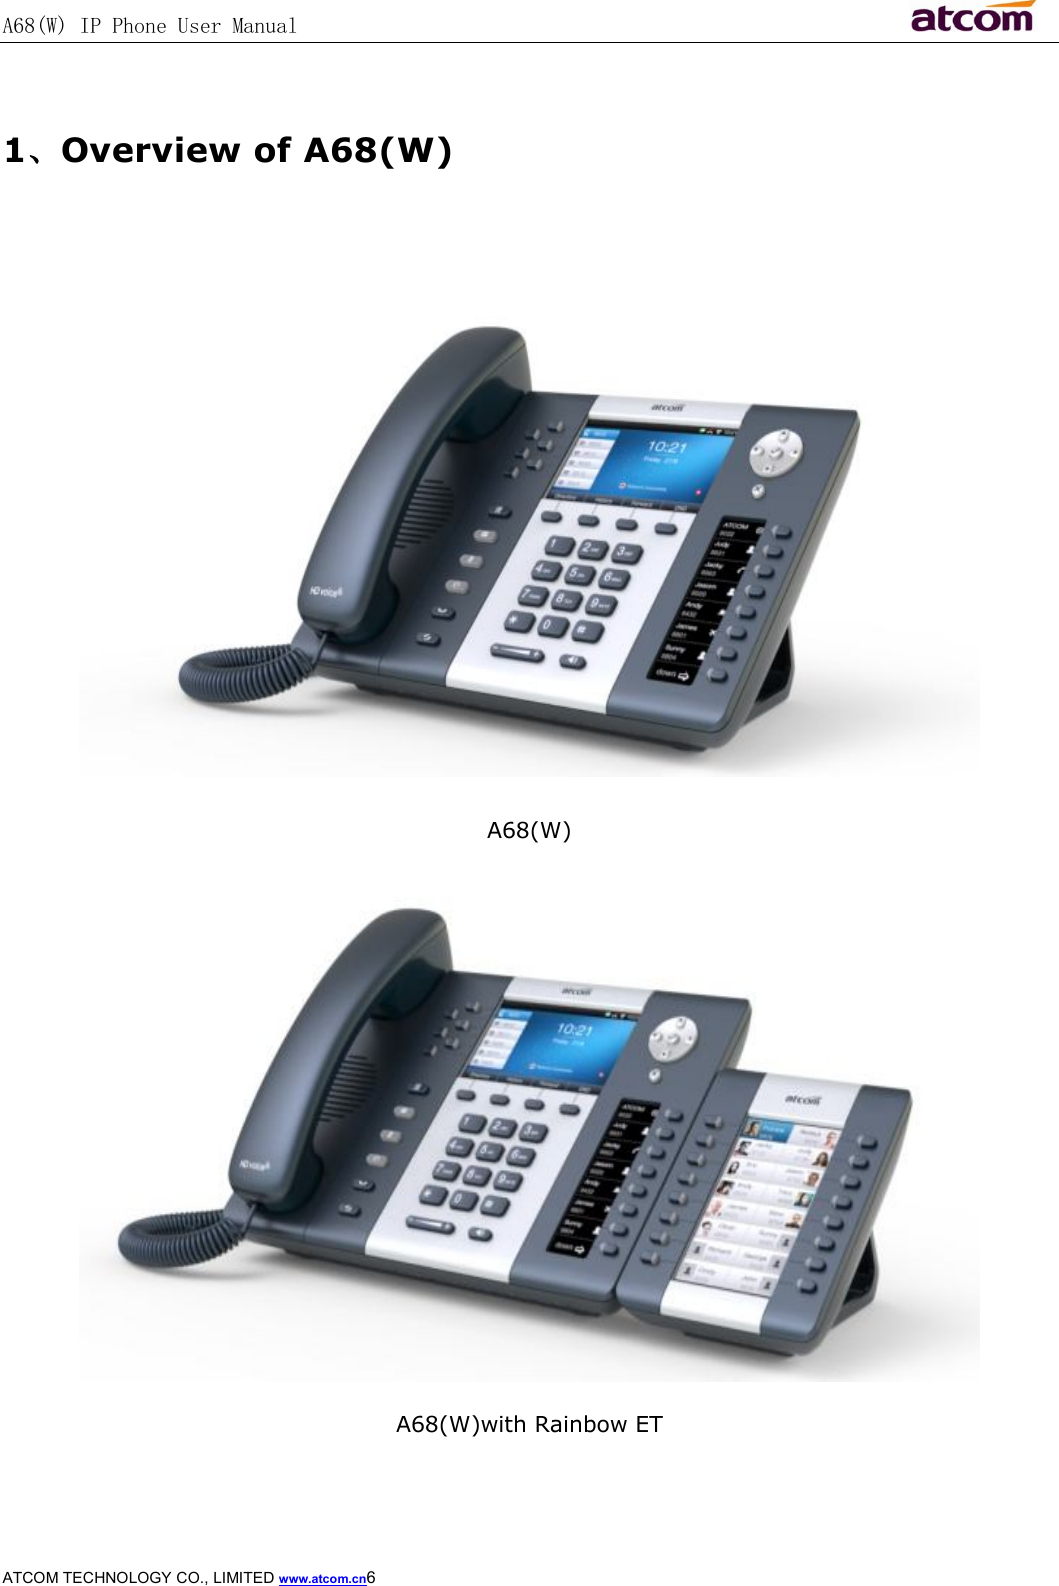 A68(W) IP Phone User Manual                                                           ATCOM TECHNOLOGY CO., LIMITED www.atcom.cn6   1、Overview of A68(W)   A68(W)  A68(W)with Rainbow ET  